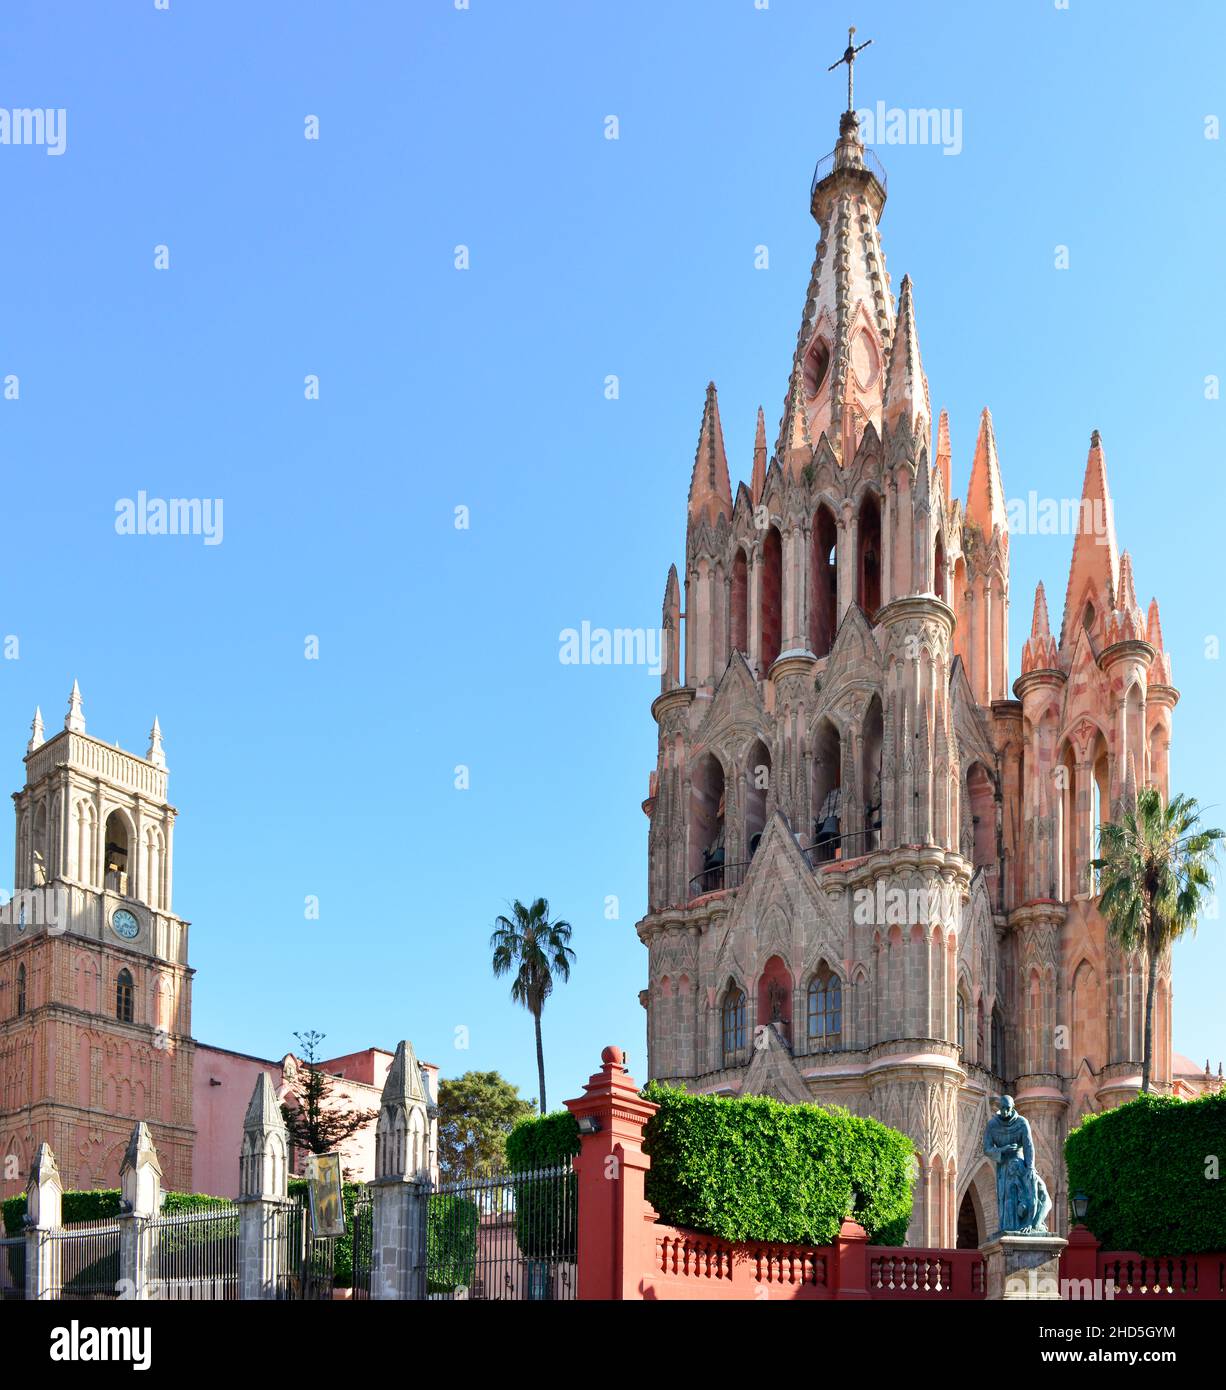 View of the spectacular pink 17th Century Neo-Gothic Parroquia de San Miguel Arcangel cathedral with Fray Juan statue in San Miguel de Allende, MX Stock Photo